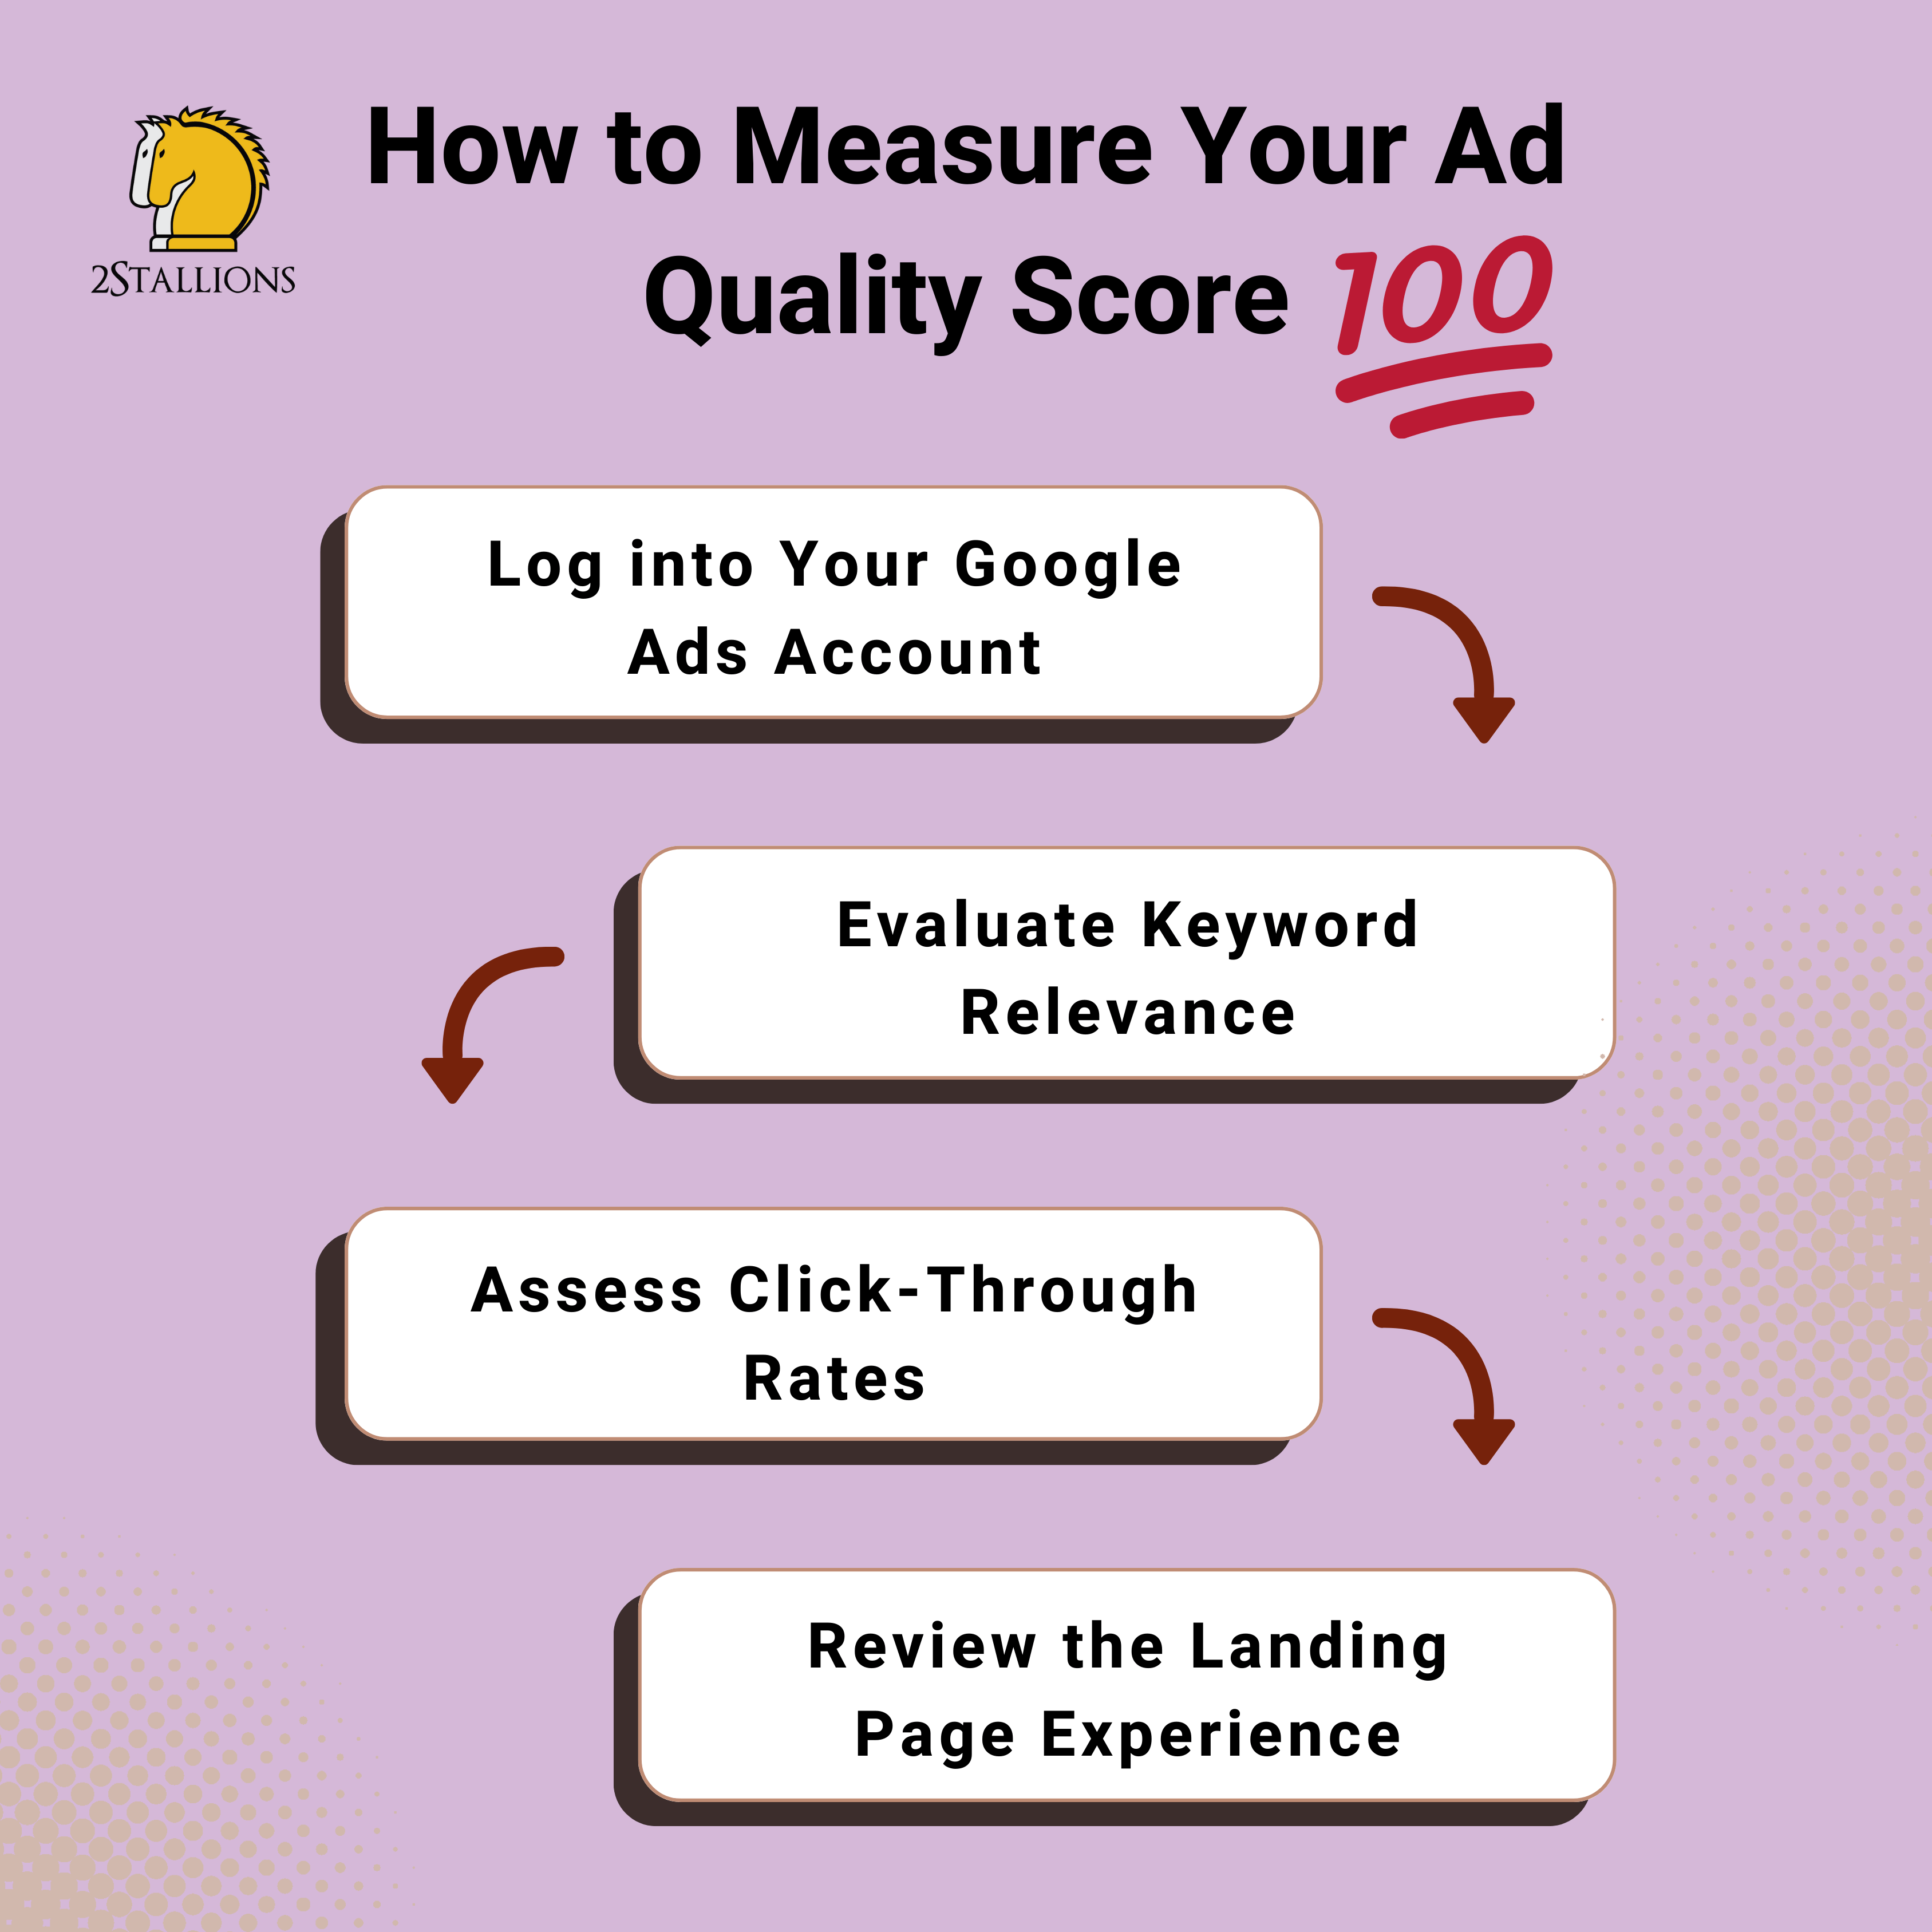 How to Measure Your Ad Quality Score | 2Stallions